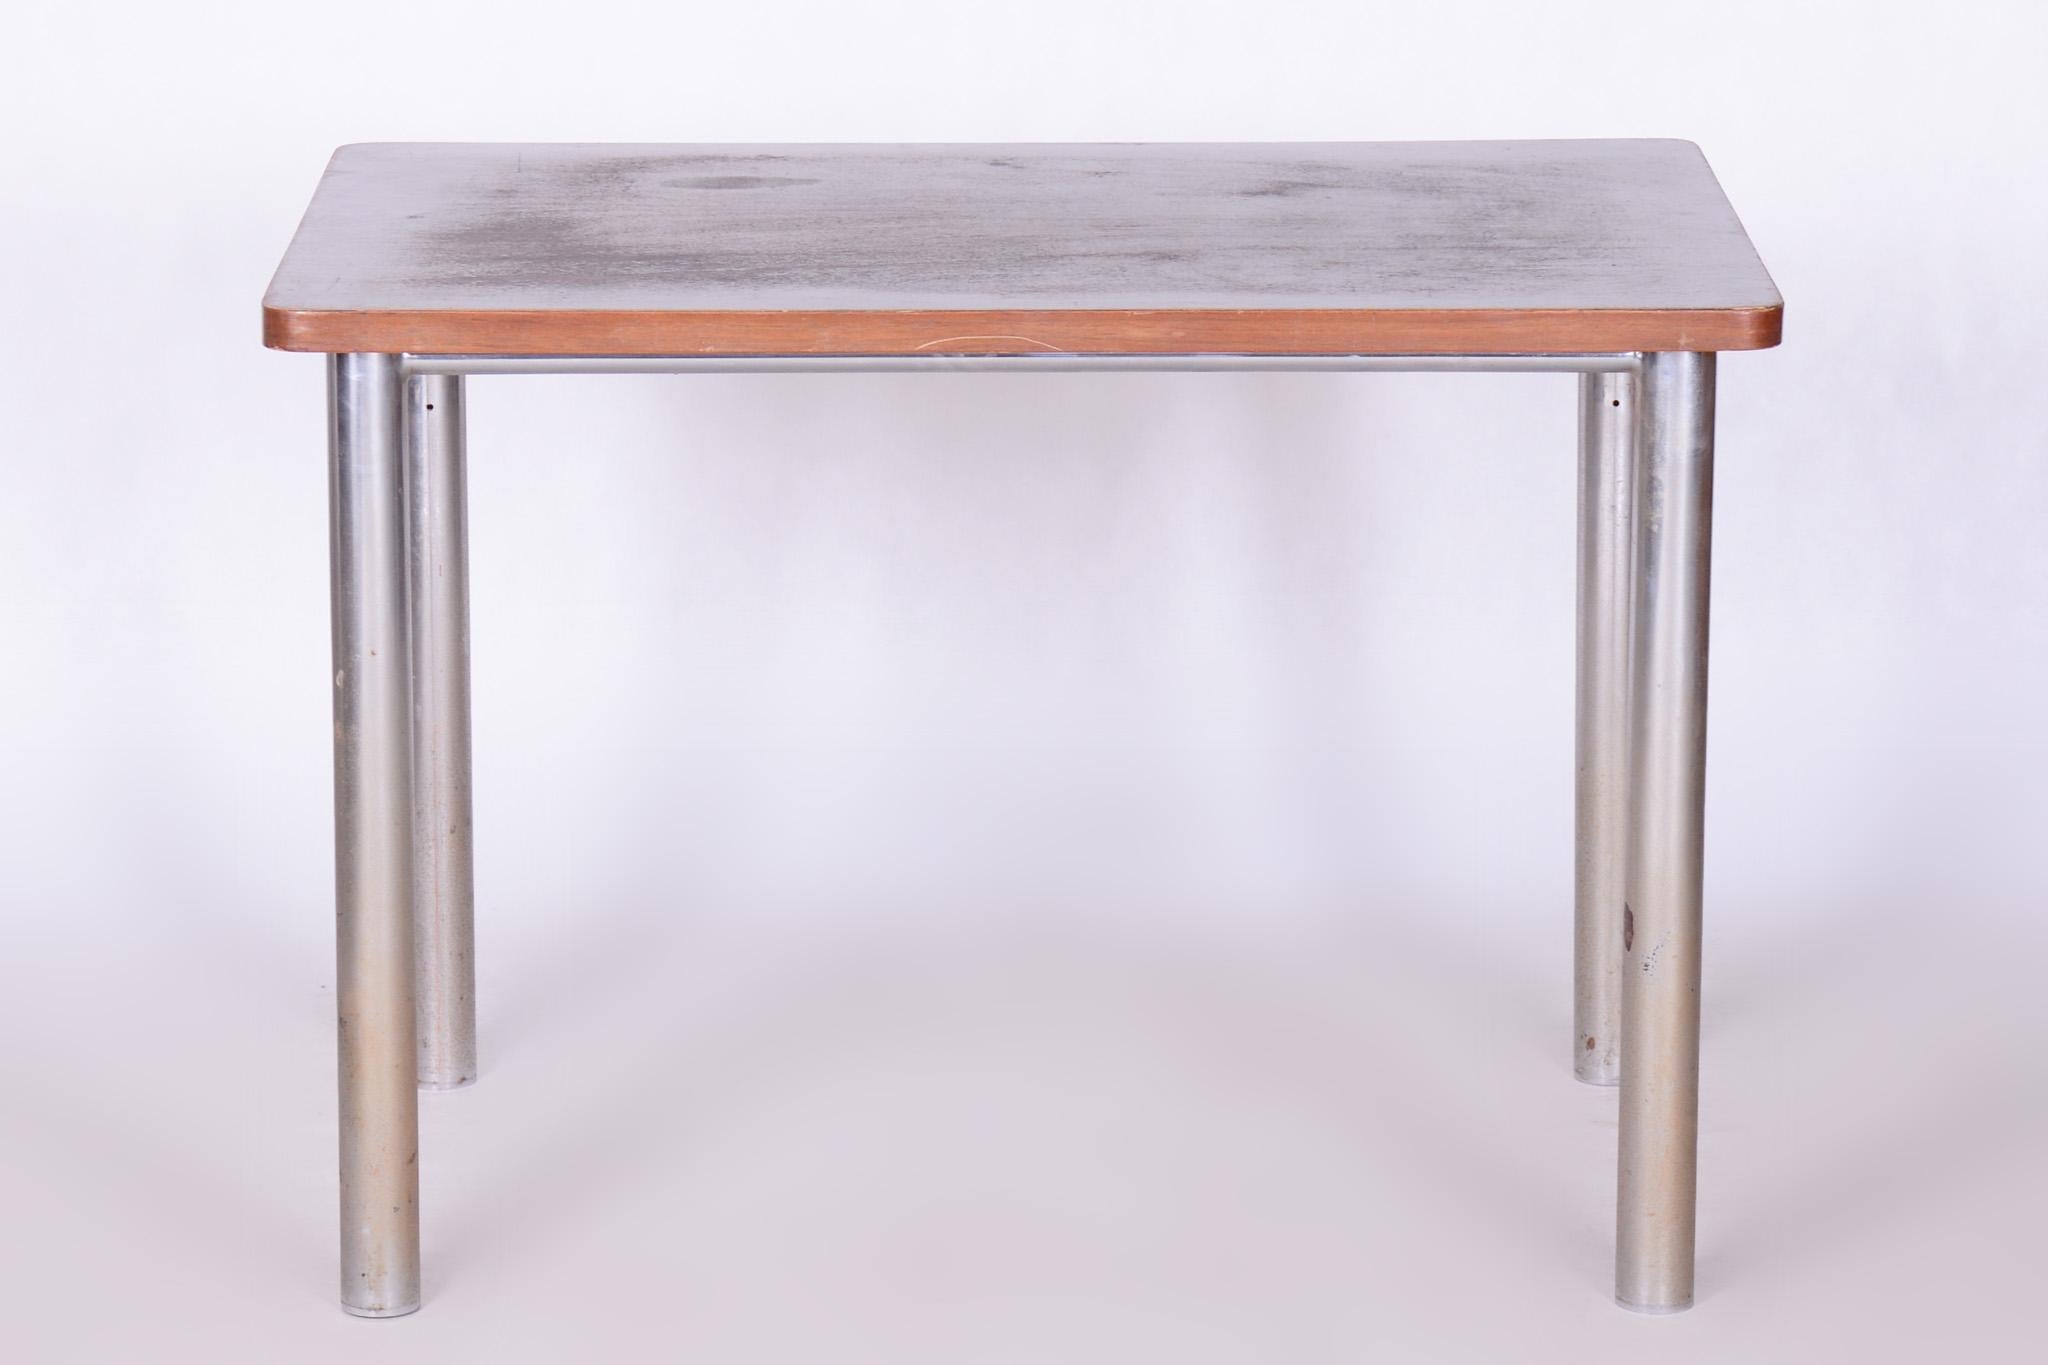 Original Bauhaus table

Period: 1930-1939
Source: Czechia
Material: Chrome-Plated Steel, Walnut, Polish 

Original well preserved condition.

In pristine original condition, the item has been professionally cleaned, and its polish has been revived